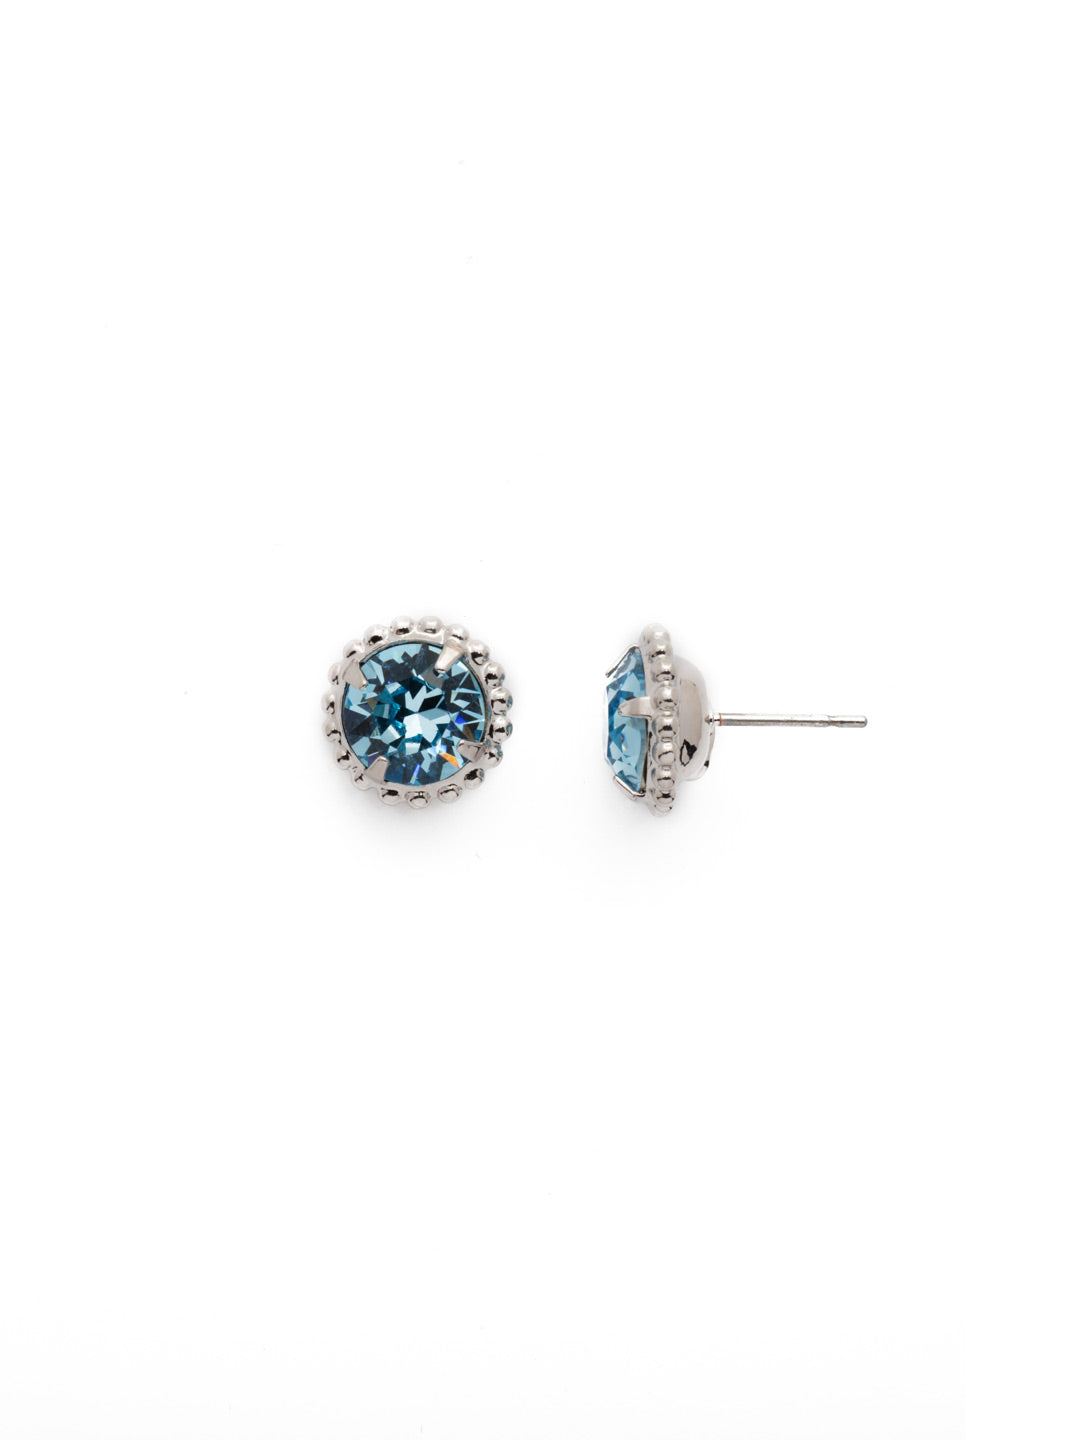 Simplicity Stud Earring - EBY38RHAQU - A timeless classic, the Simplicity Stud Earrings feature round cut crystals in a variety of colors; accented with a halo of metal beaded detail. From Sorrelli's Aquamarine collection in our Palladium Silver-tone finish.